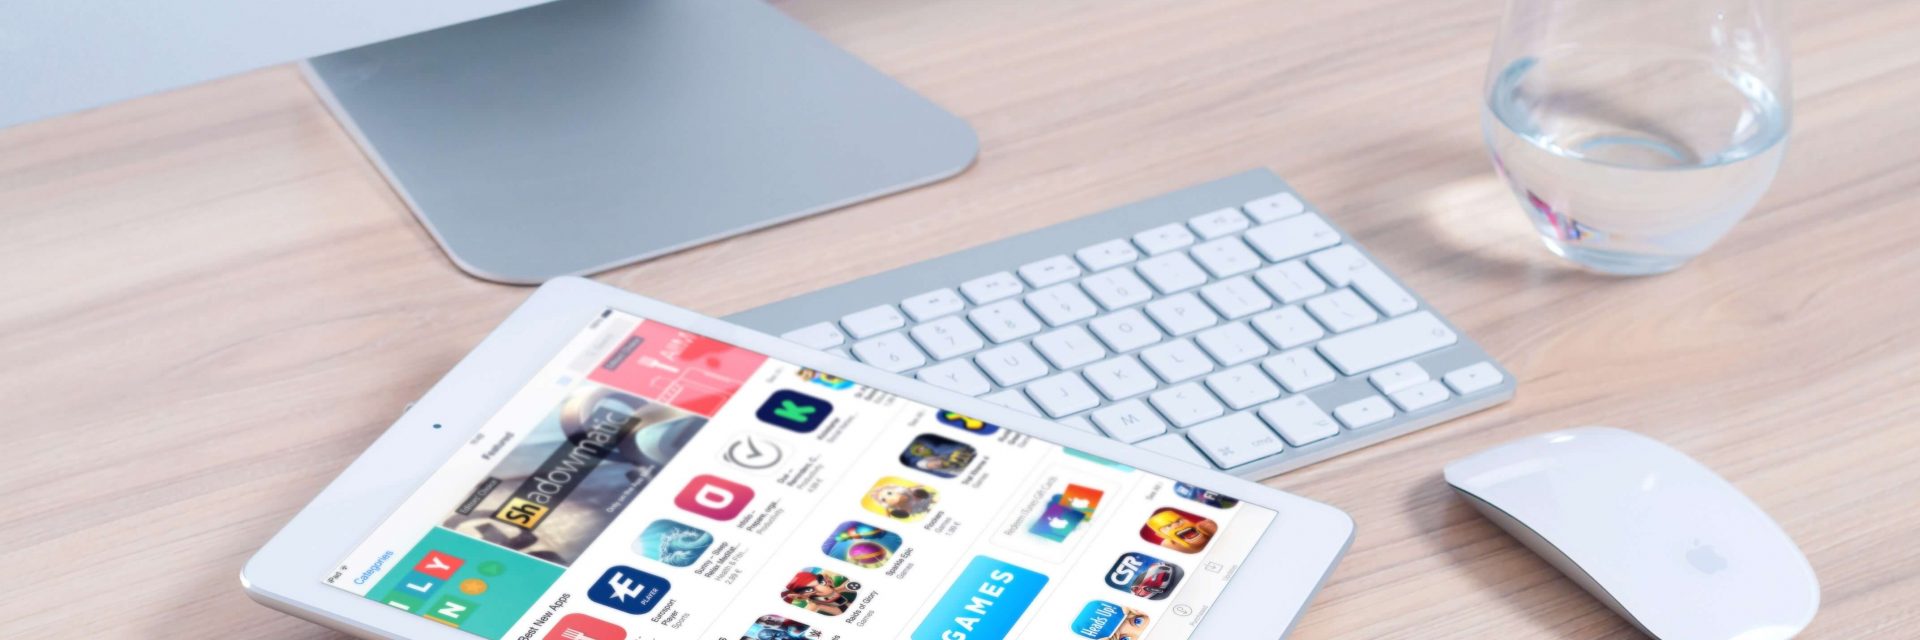 Step-by-step Guide to Getting Your App on the App Store 1